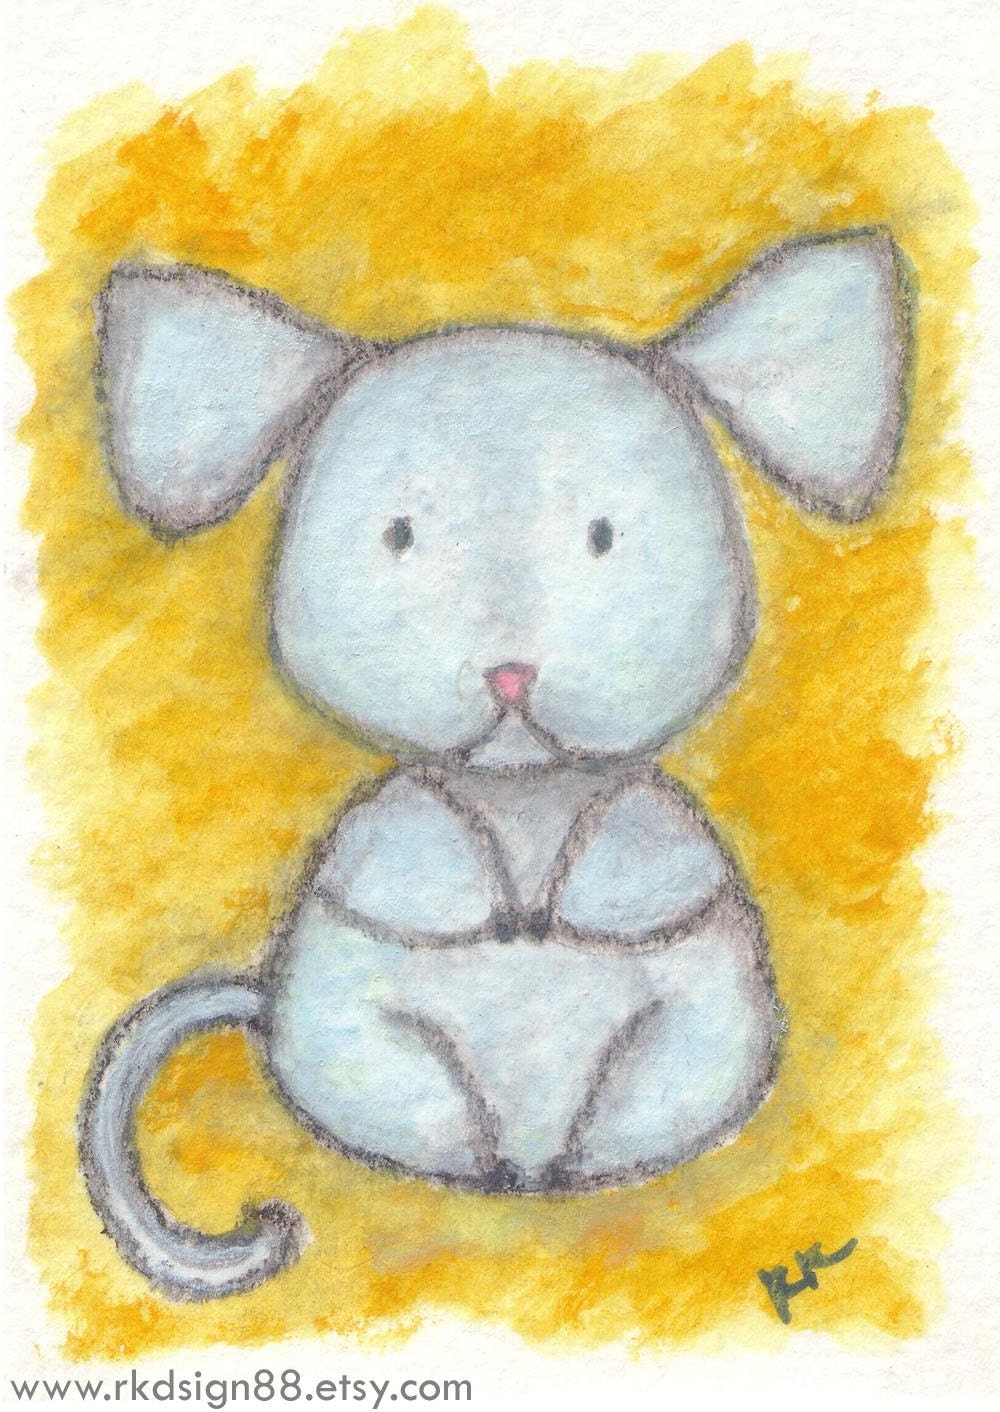 art painting aceo atc rkdsign88.blogspot.com rat mouse drawing etsy chinese zodiac watercolor